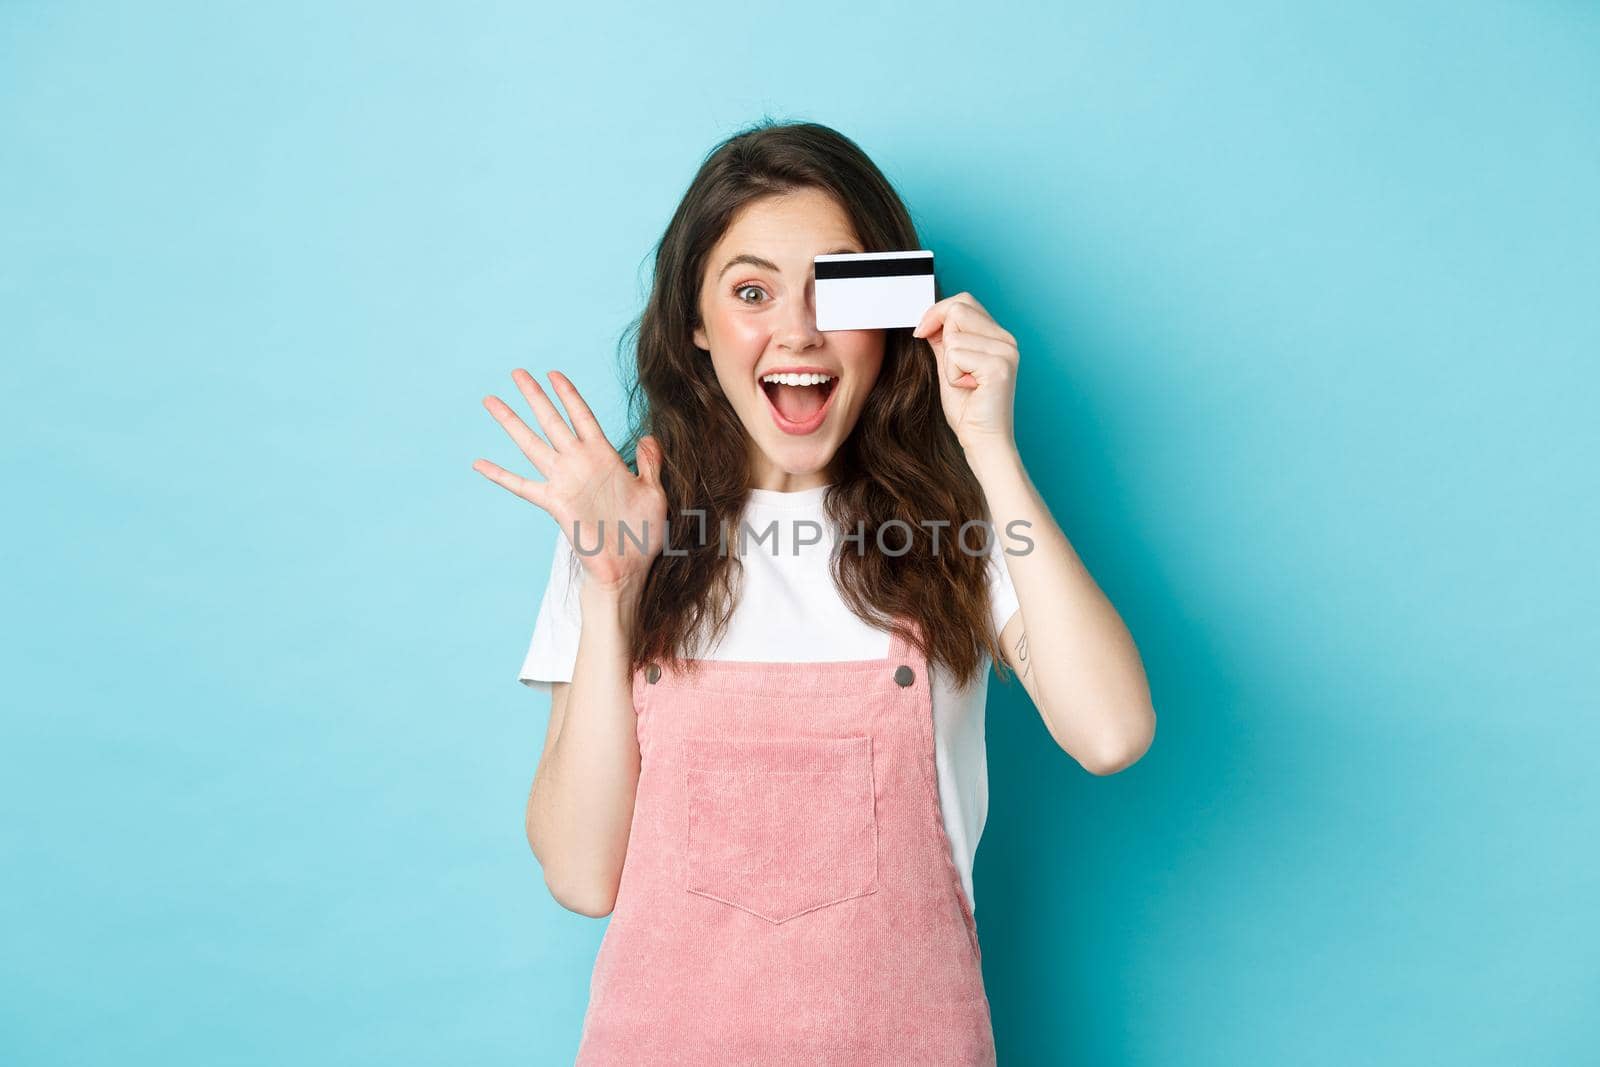 Excited and surprised young woman holding plastic credit card over eye, scream of joy while shopping, see something cool to buy, standing over blue background.